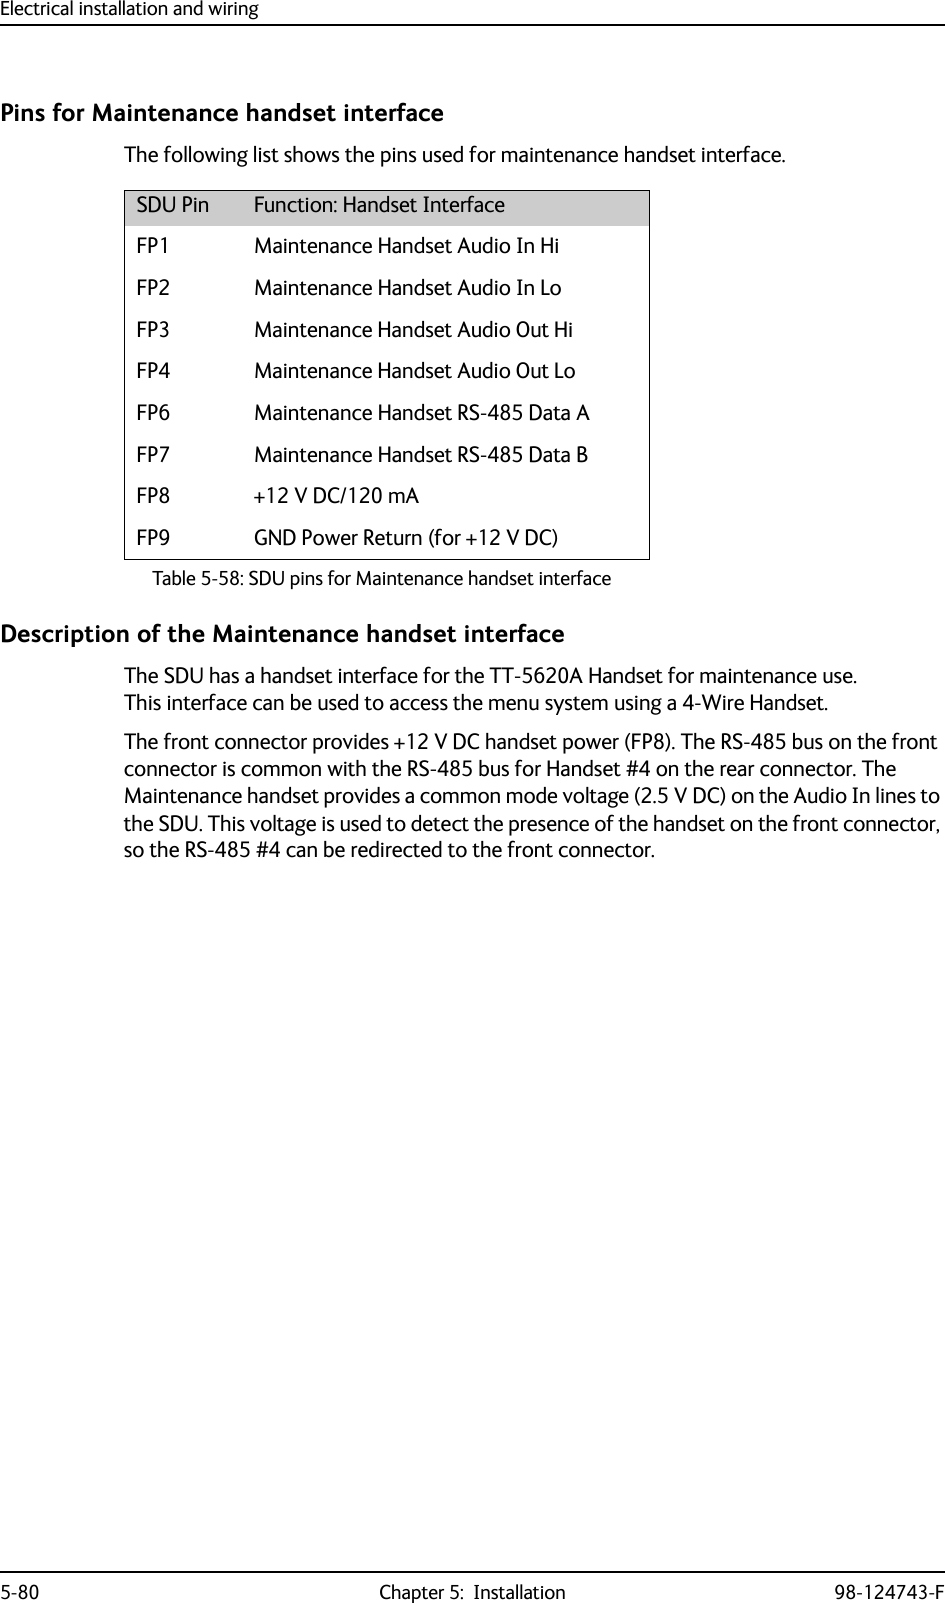 Electrical installation and wiring5-80 Chapter 5:  Installation 98-124743-FPins for Maintenance handset interfaceThe following list shows the pins used for maintenance handset interface.Description of the Maintenance handset interfaceThe SDU has a handset interface for the TT-5620A Handset for maintenance use.This interface can be used to access the menu system using a 4-Wire Handset.The front connector provides +12 V DC handset power (FP8). The RS-485 bus on the front connector is common with the RS-485 bus for Handset #4 on the rear connector. The Maintenance handset provides a common mode voltage (2.5 V DC) on the Audio In lines to the SDU. This voltage is used to detect the presence of the handset on the front connector, so the RS-485 #4 can be redirected to the front connector. SDU Pin Function: Handset InterfaceFP1 Maintenance Handset Audio In HiFP2 Maintenance Handset Audio In LoFP3 Maintenance Handset Audio Out HiFP4 Maintenance Handset Audio Out LoFP6 Maintenance Handset RS-485 Data AFP7 Maintenance Handset RS-485 Data BFP8 +12 V DC/120 mAFP9 GND Power Return (for +12 V DC)Table 5-58: SDU pins for Maintenance handset interface  